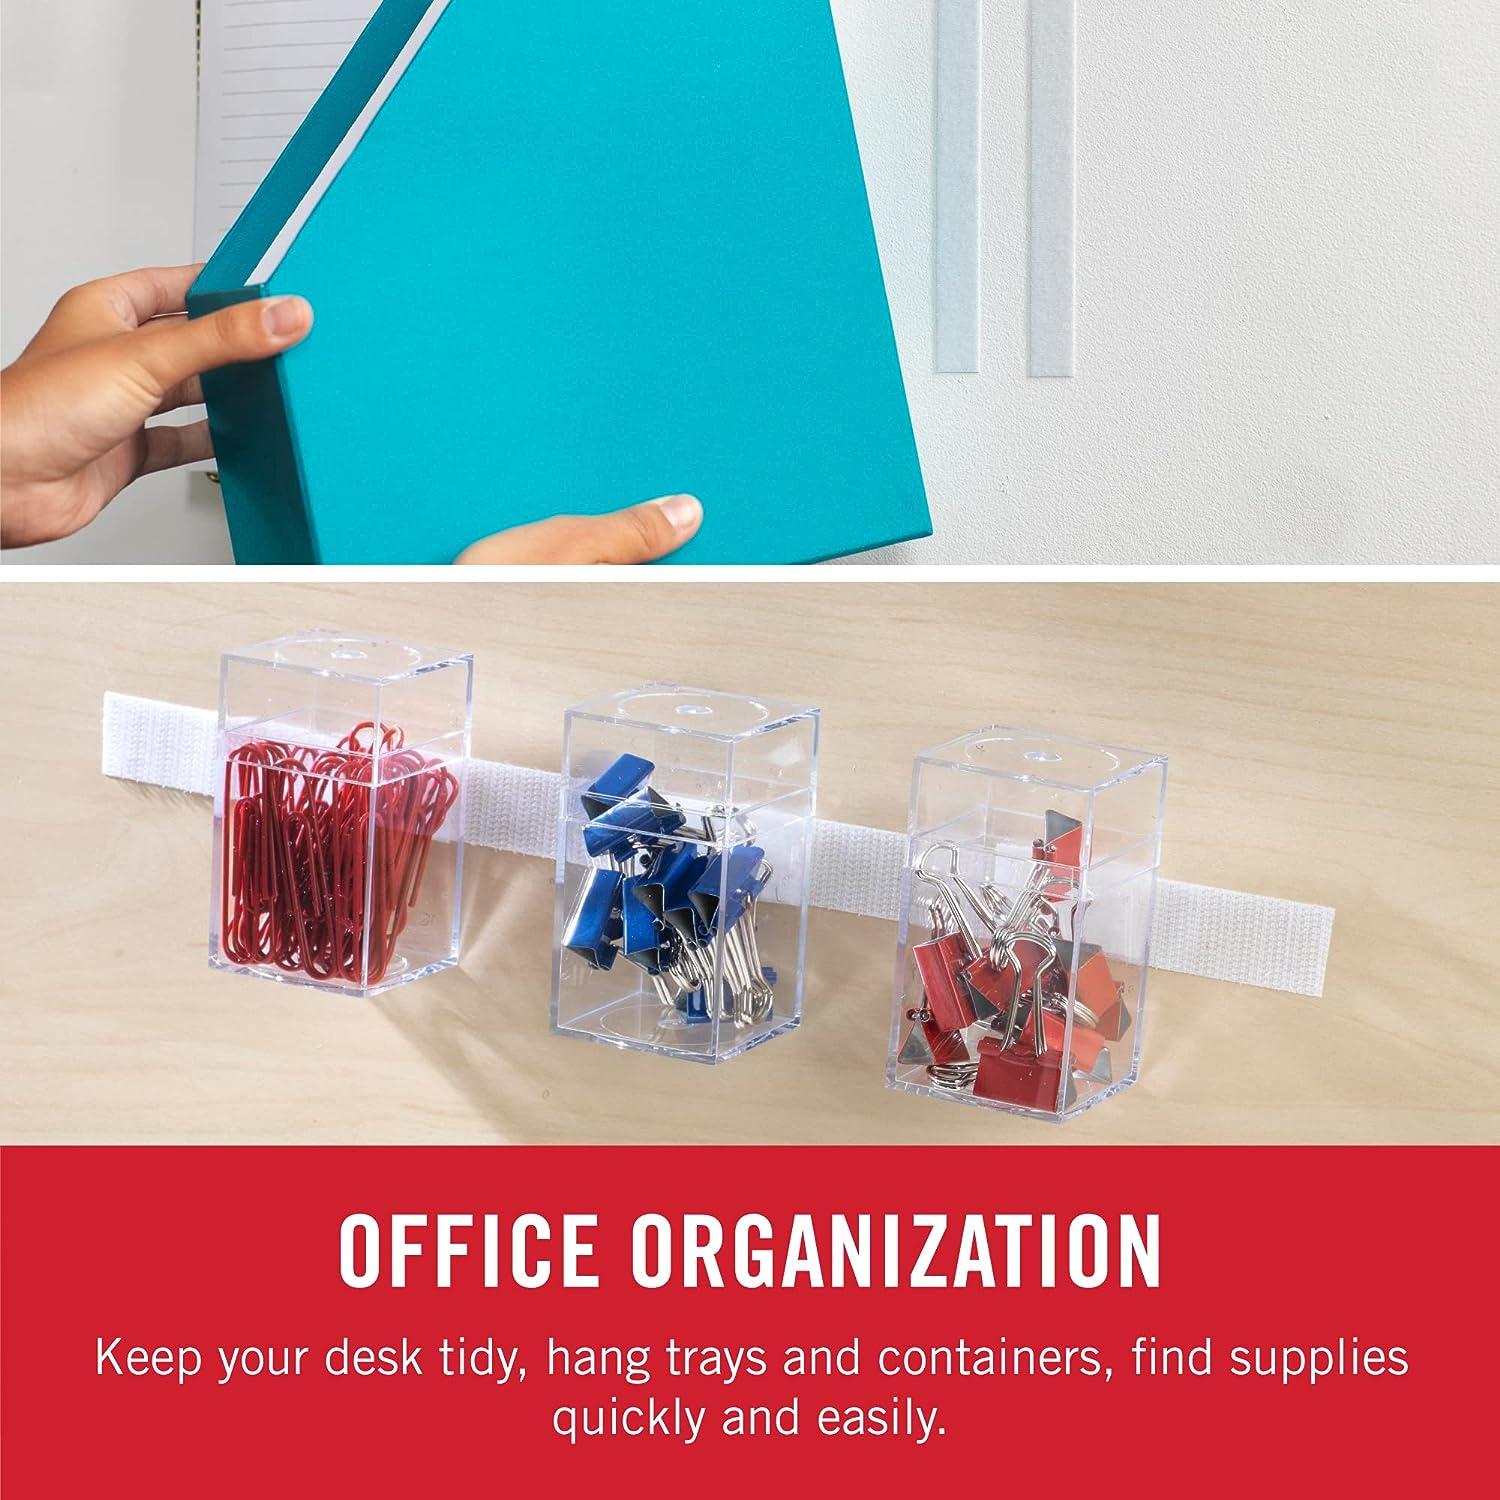 Organize Your Classroom with Velcro 